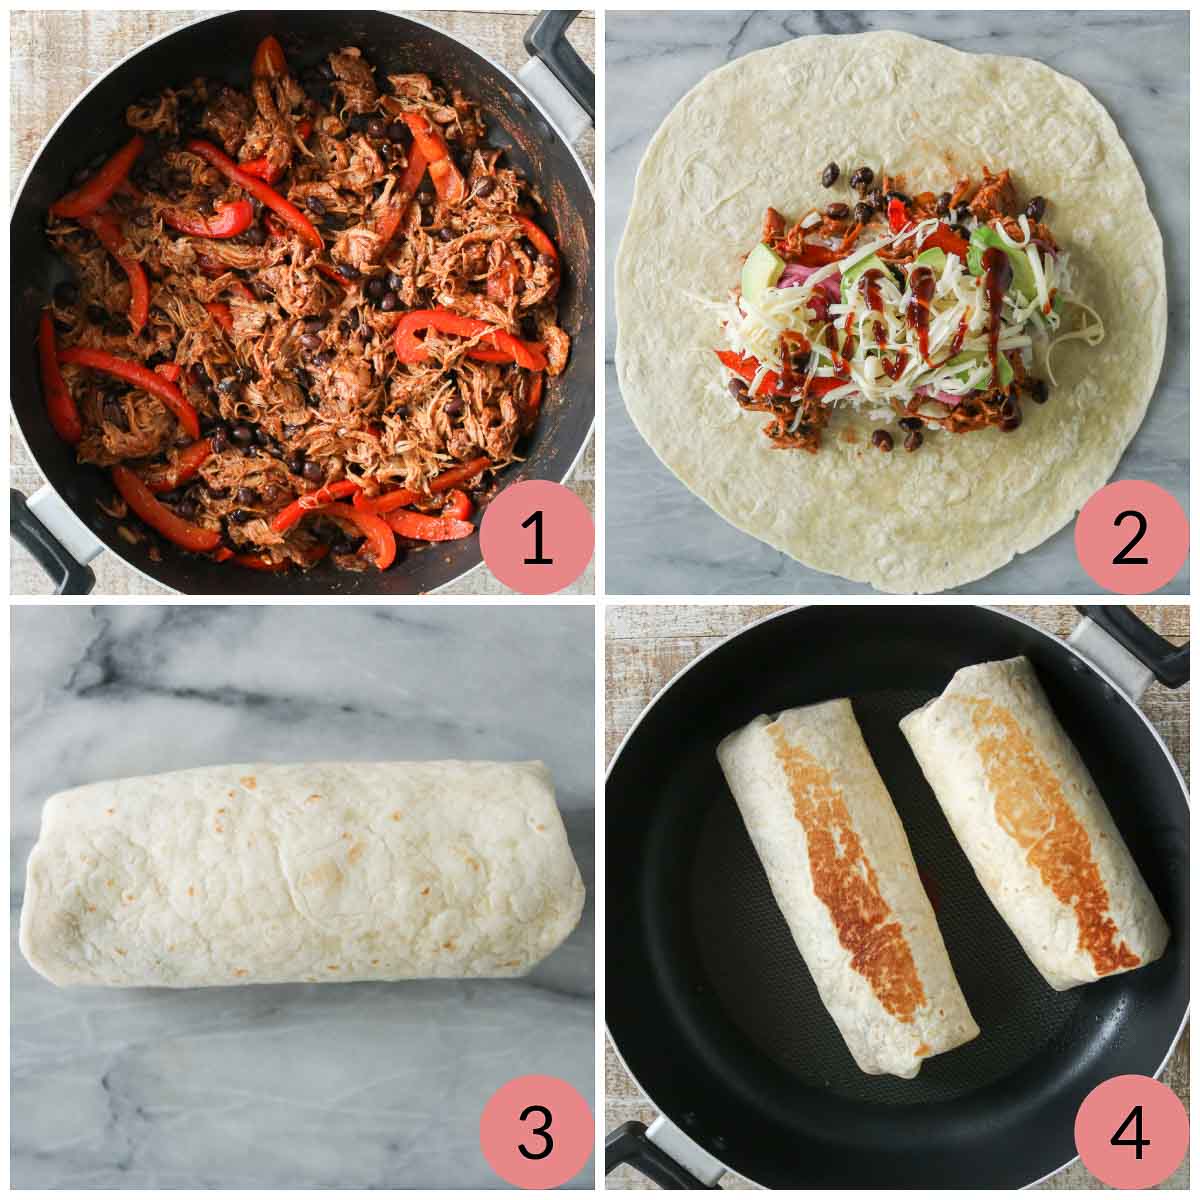 Collage of steps to make a pulled pork burrito.